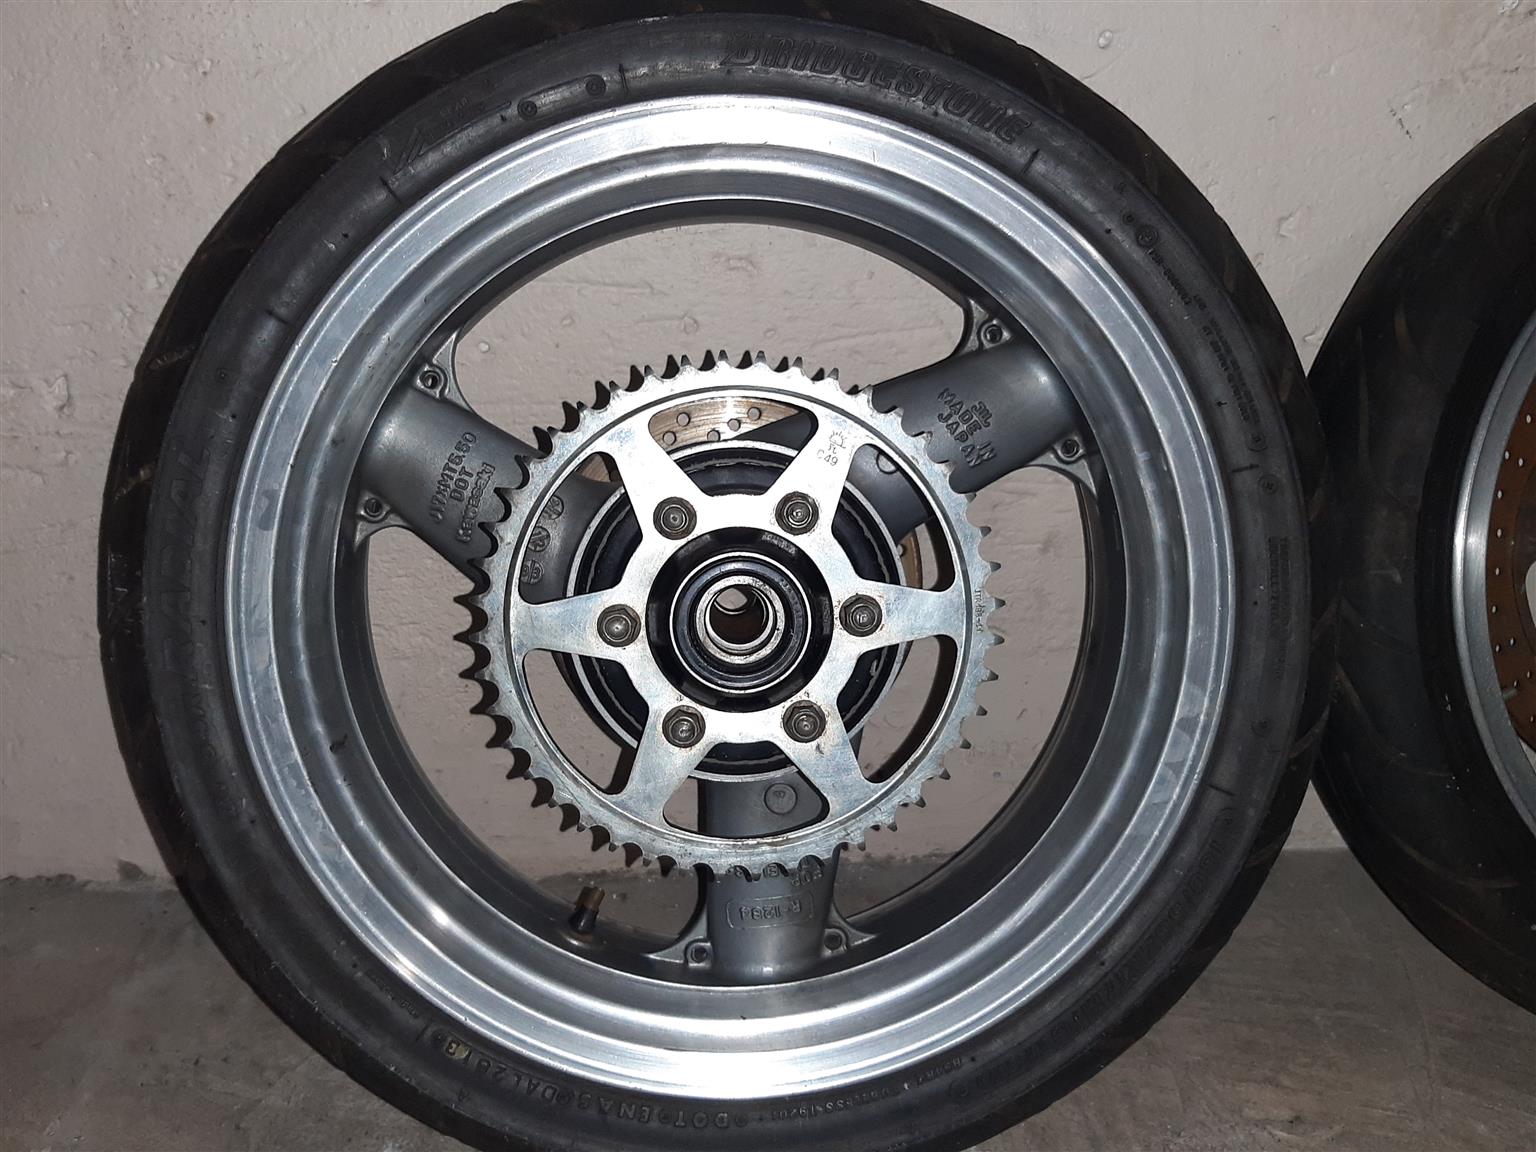 Zx9r wheels and tyres B-model